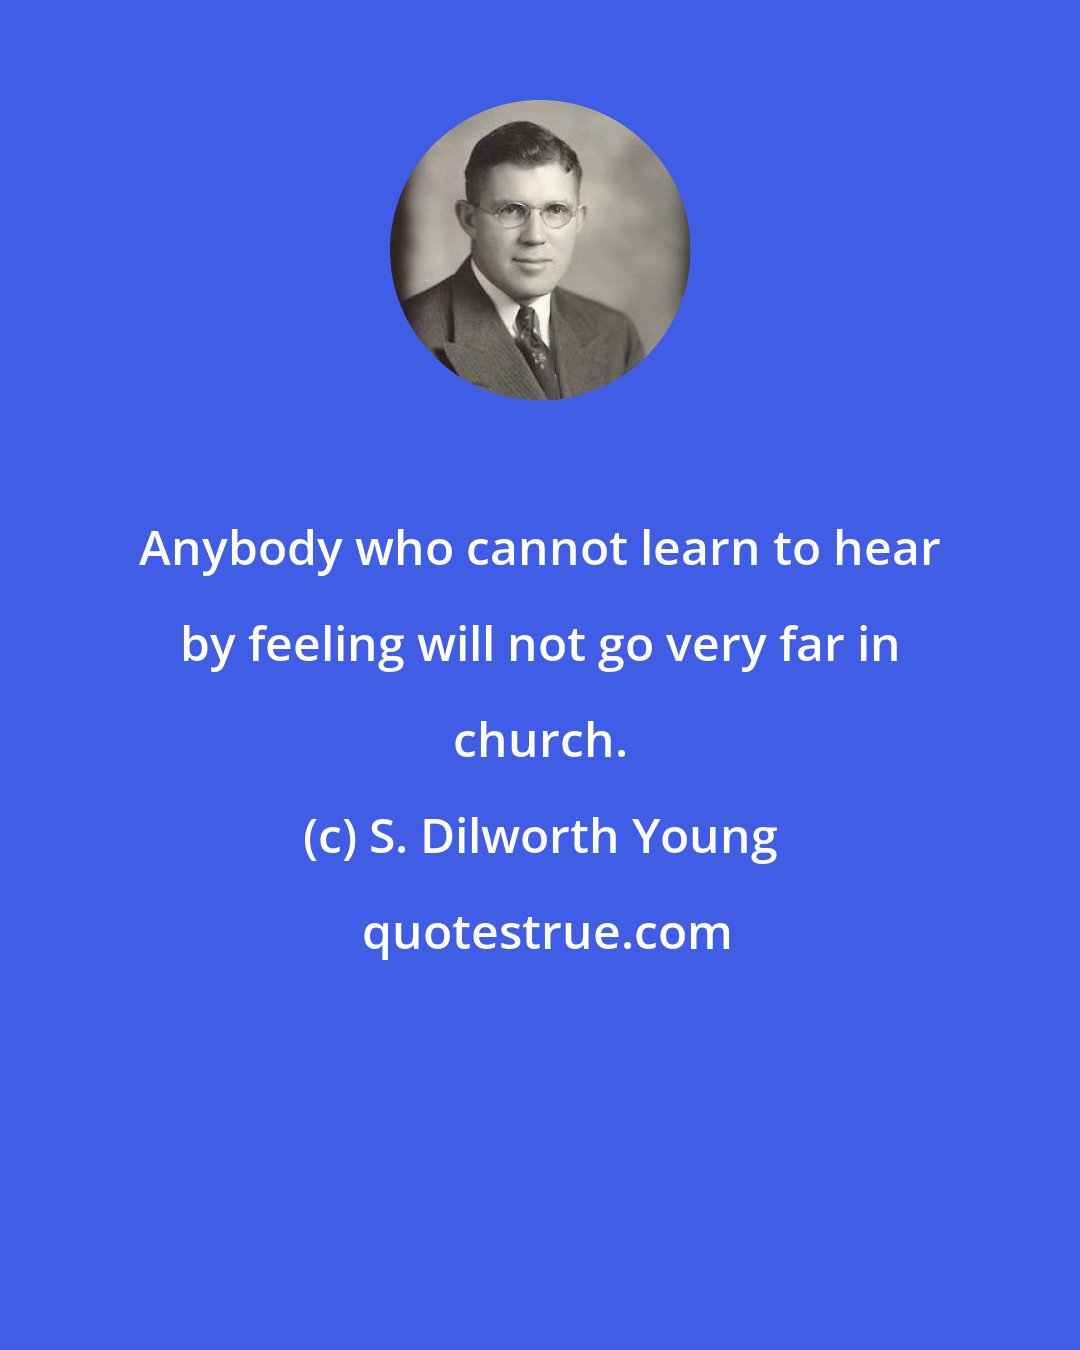 S. Dilworth Young: Anybody who cannot learn to hear by feeling will not go very far in church.